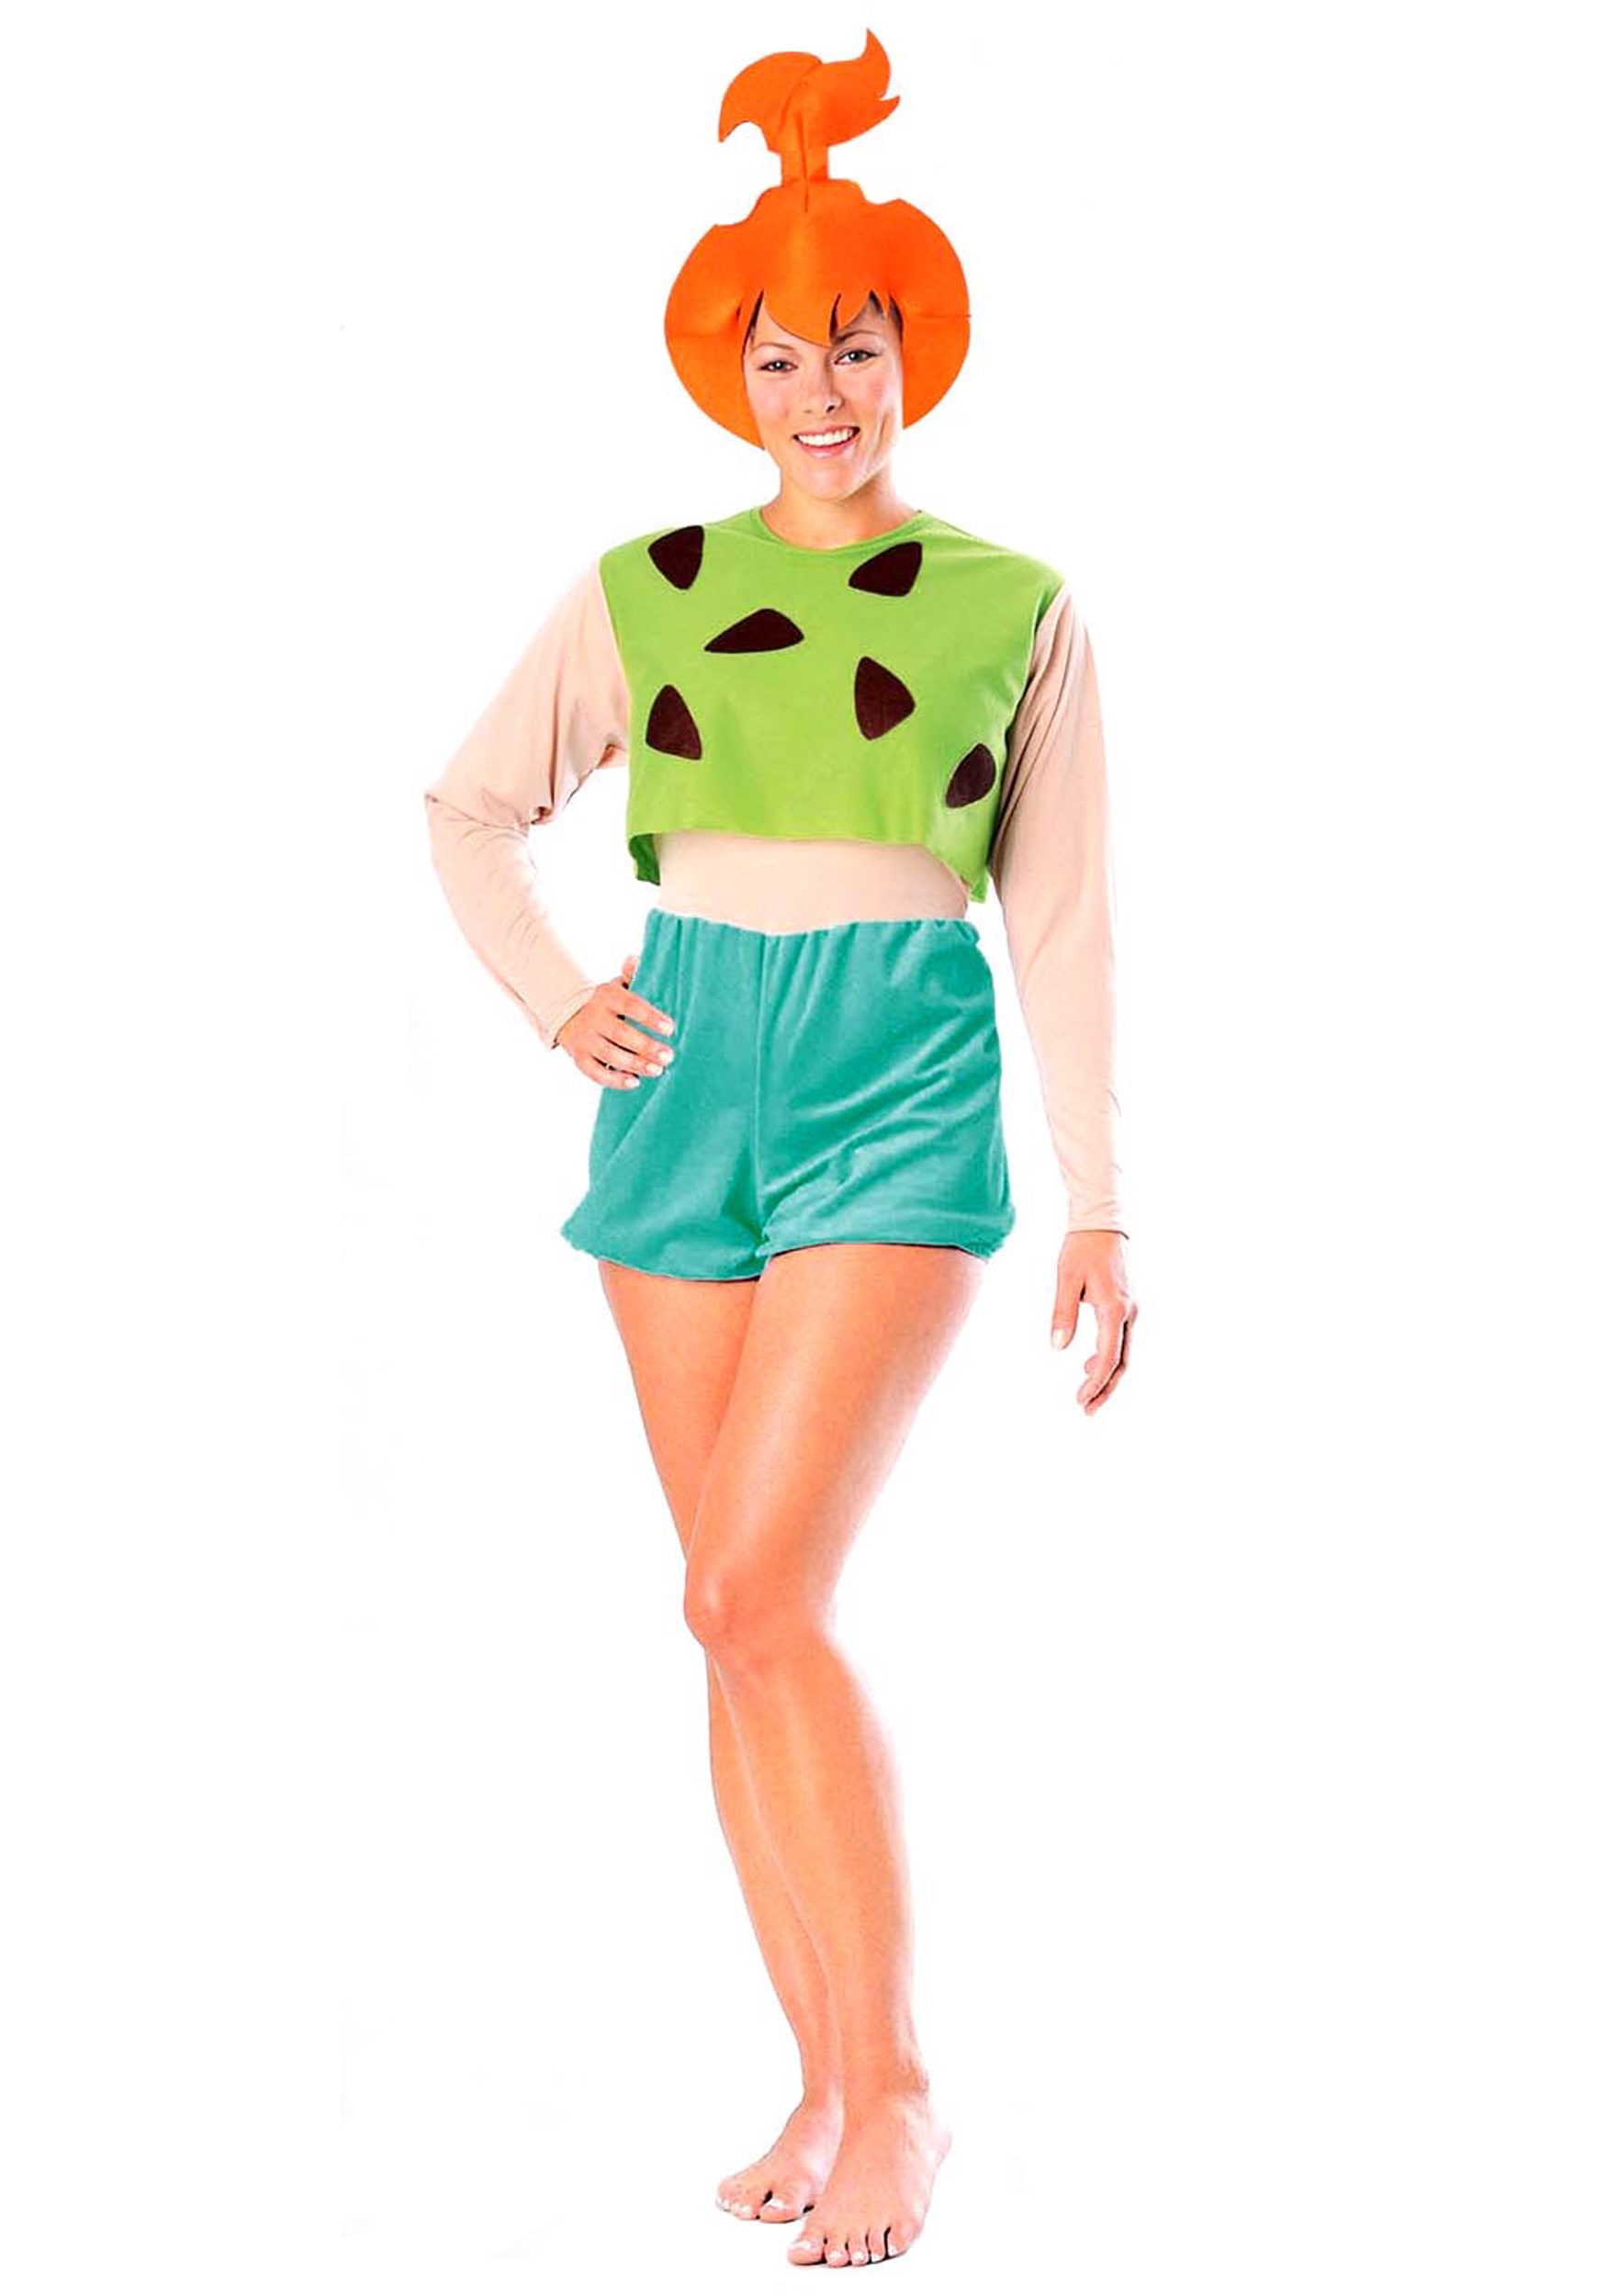 Pebbles Flintstone Adult Costume with Free Shipping in U.S., UK, Europe, Ca...